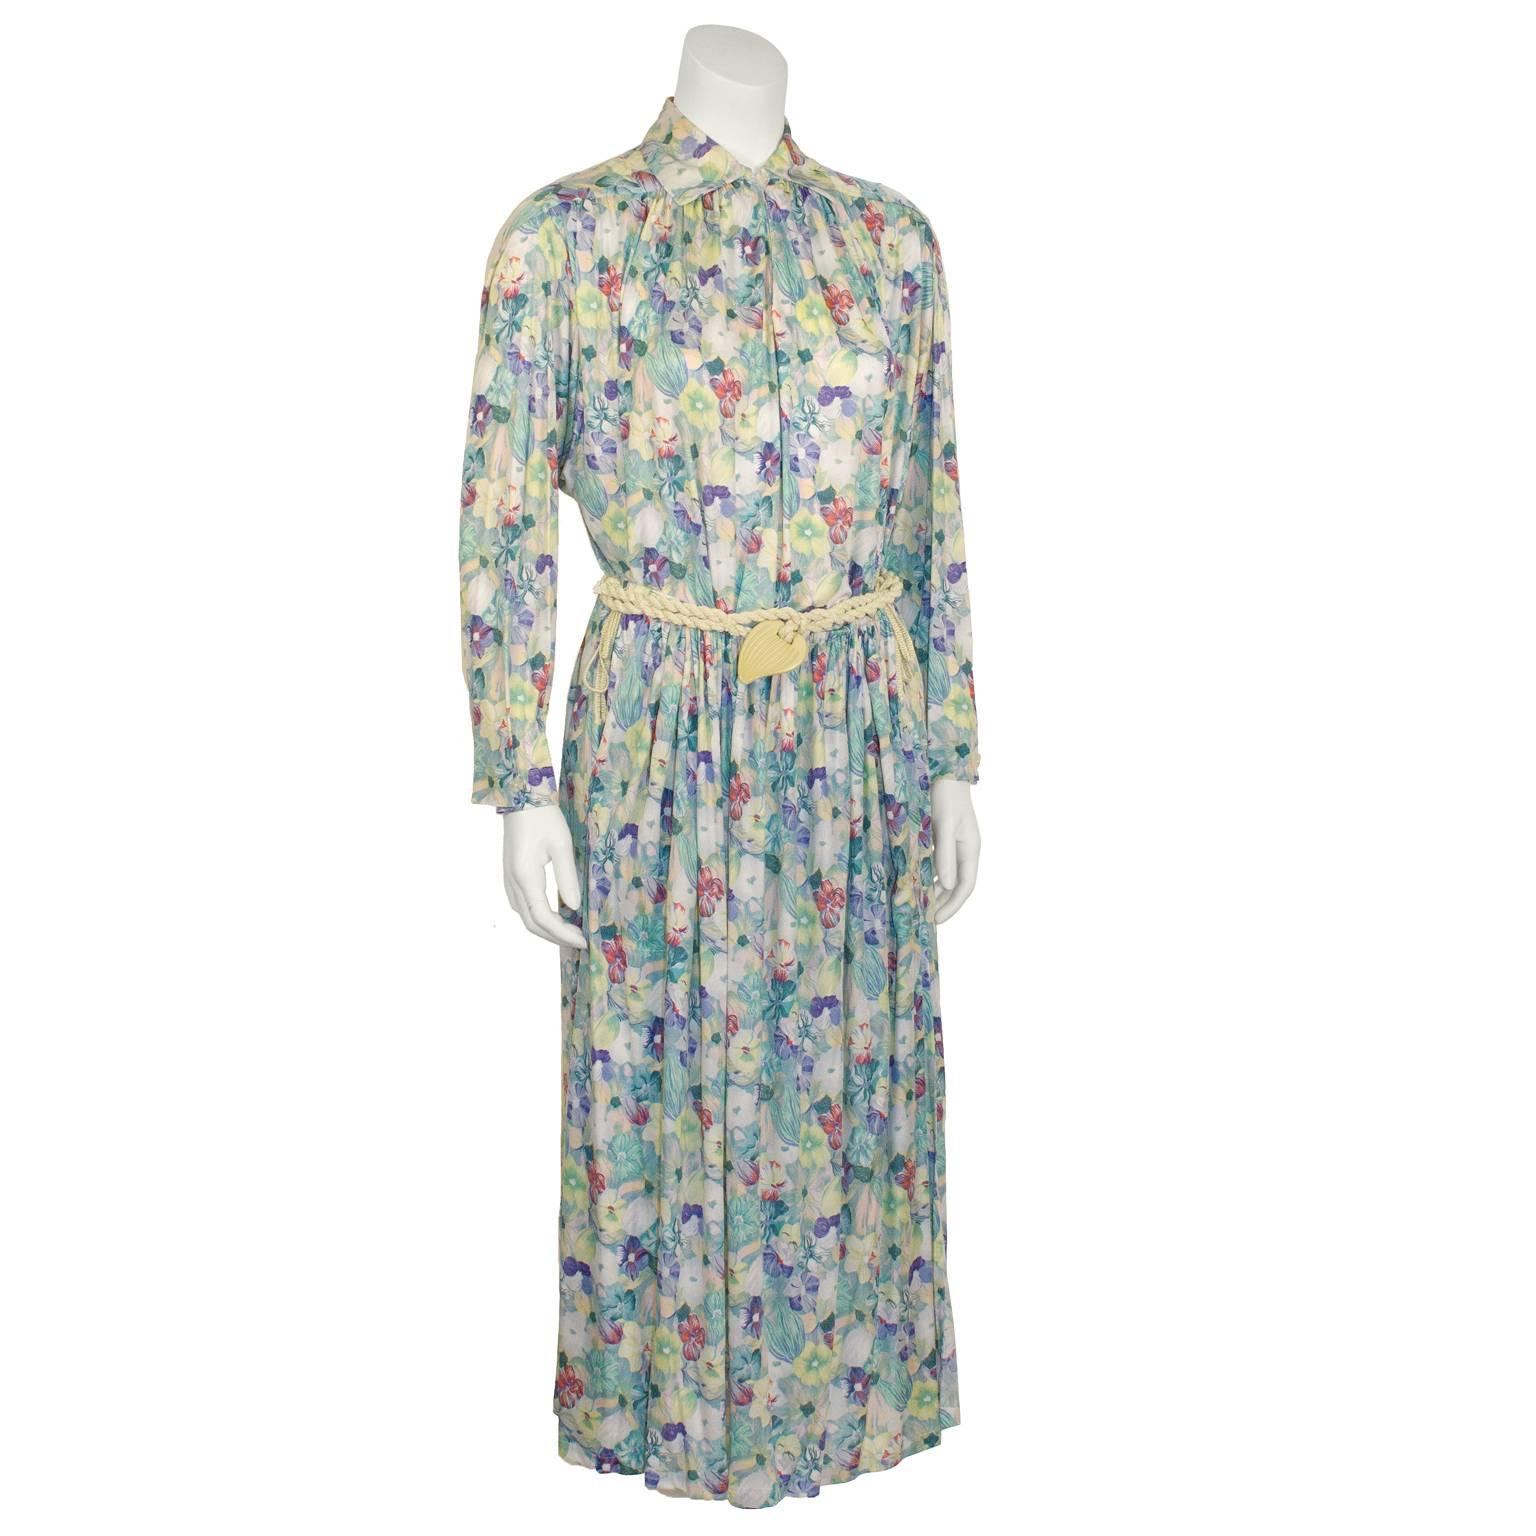 Adorable and extra soft silk jersey Missoni floral ensemble dating from the 1970's. Collared long sleeve blouse has a single button at the neck and a keyhole slit. Mid-length skirt has an elasticized waist and two large slits. Cute white roped belt